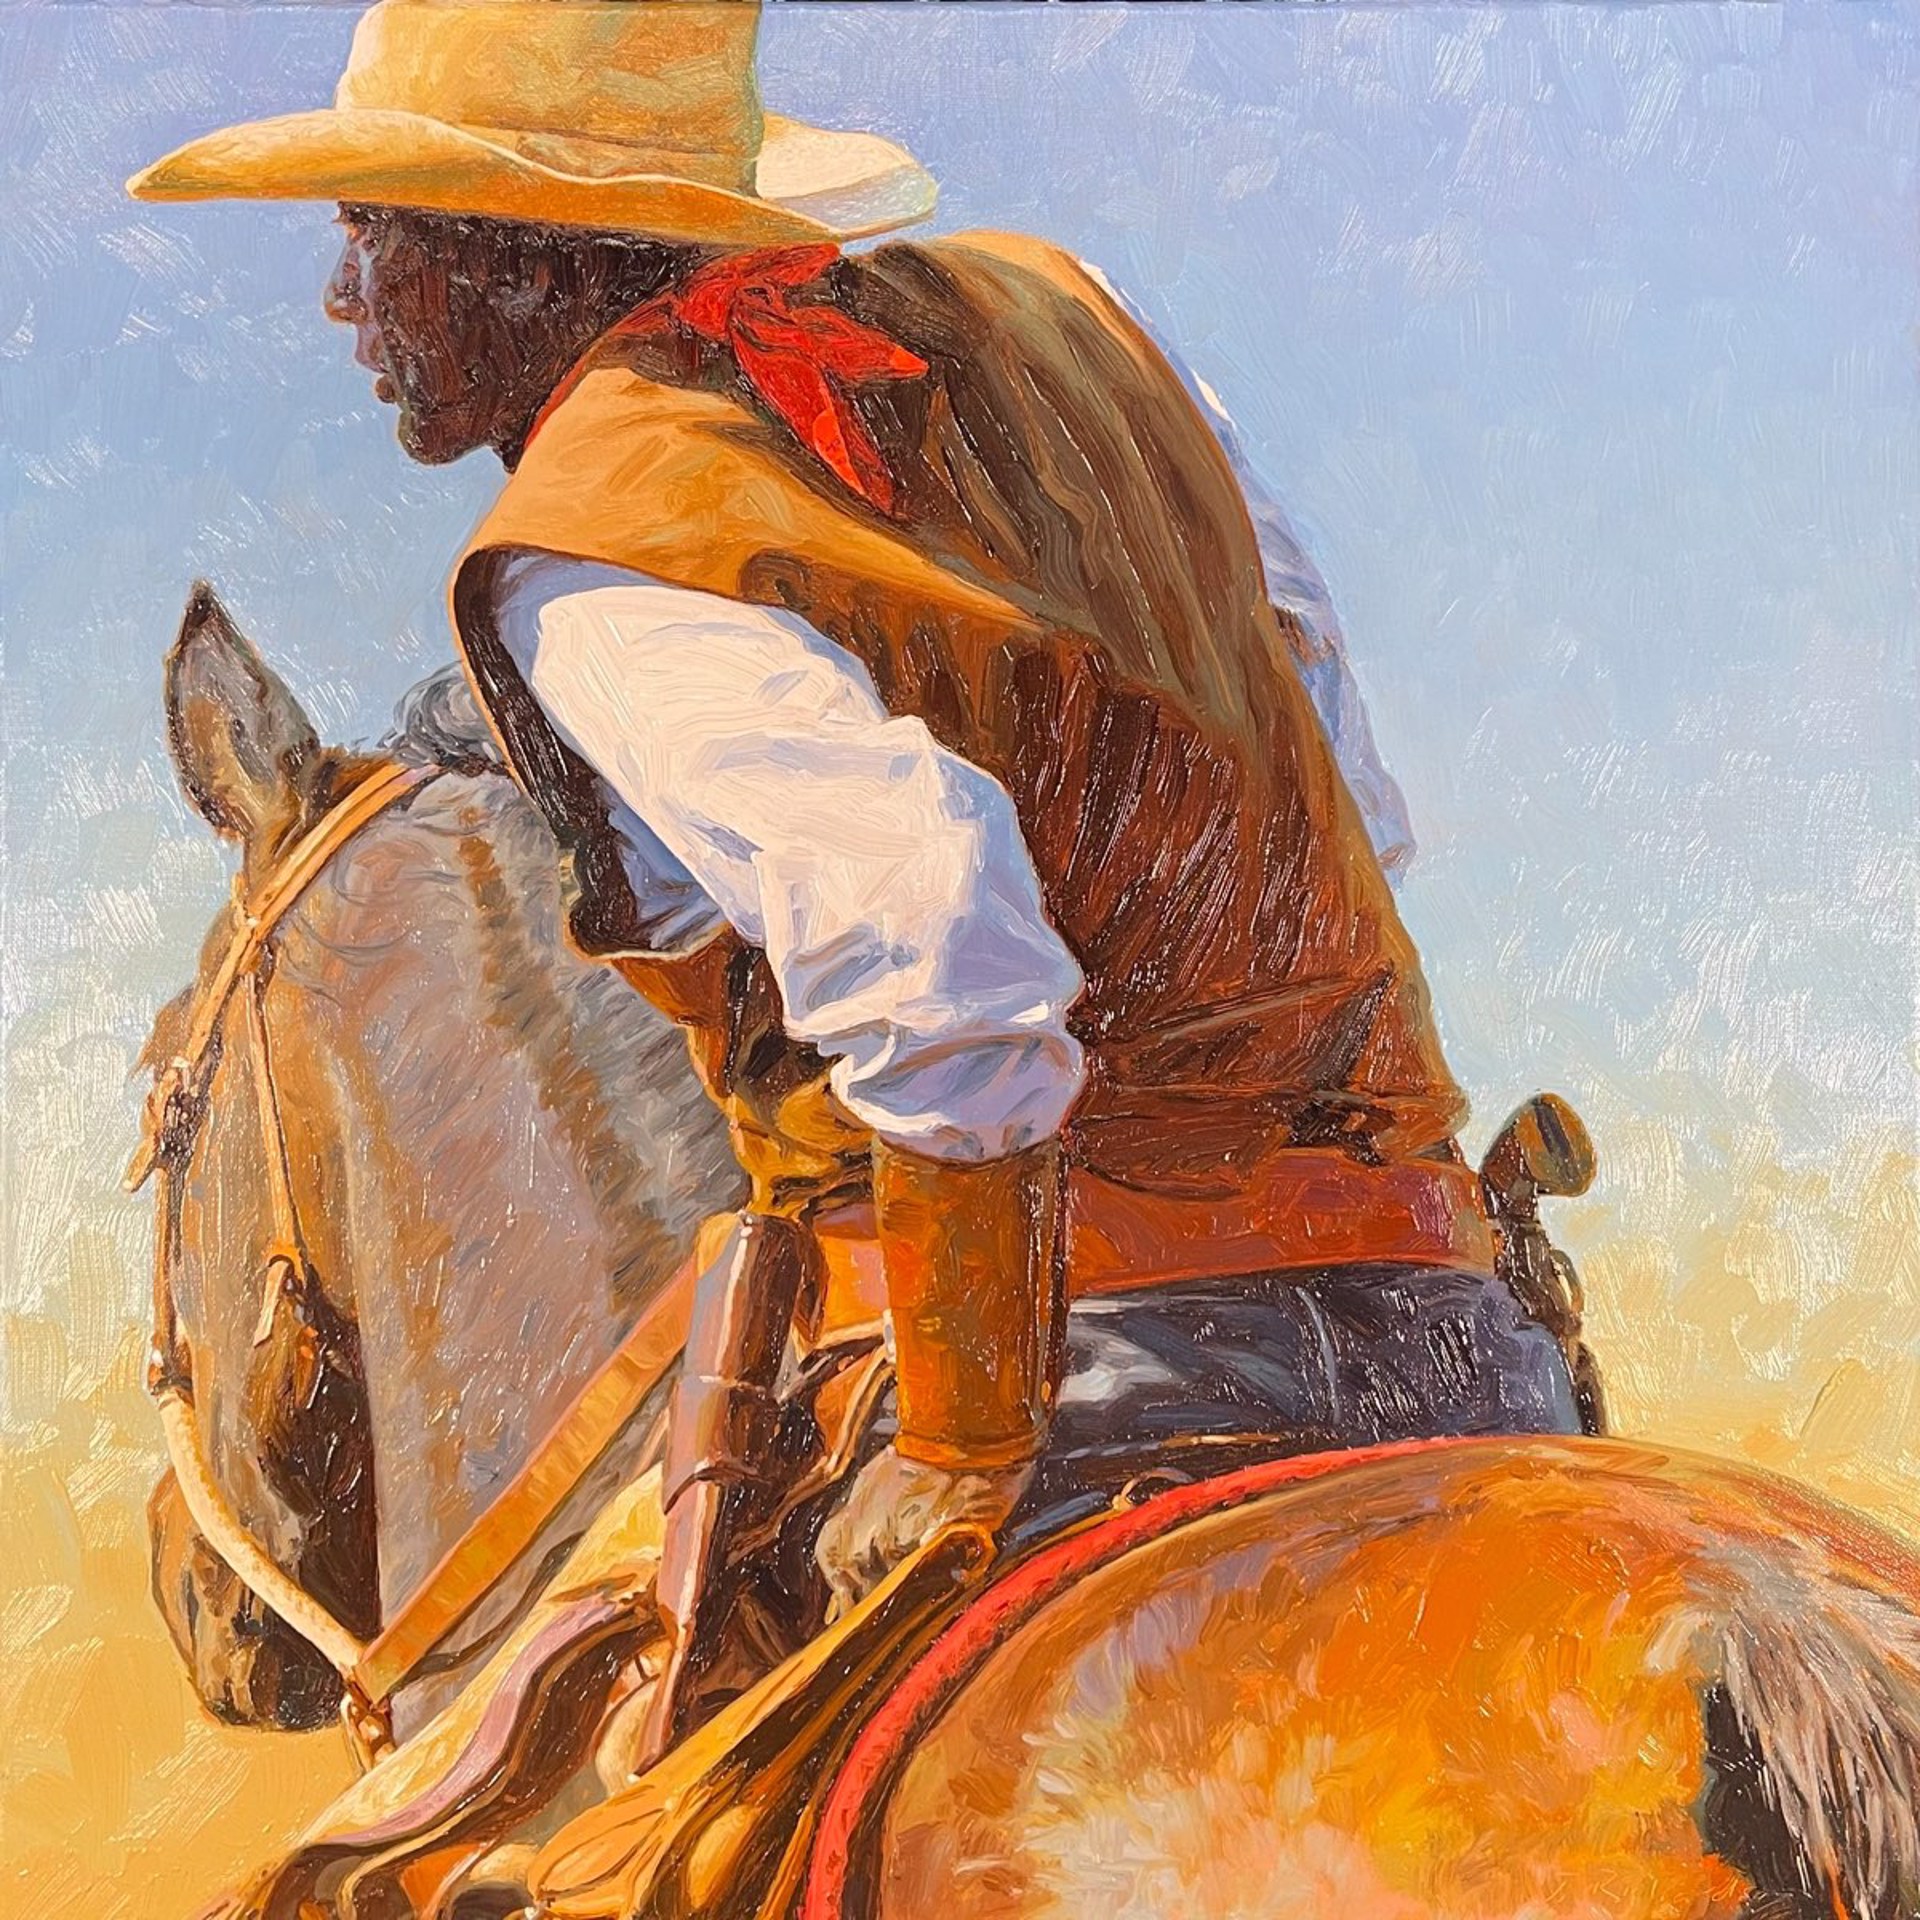 "The Trail Ahead" by Johne Richardson